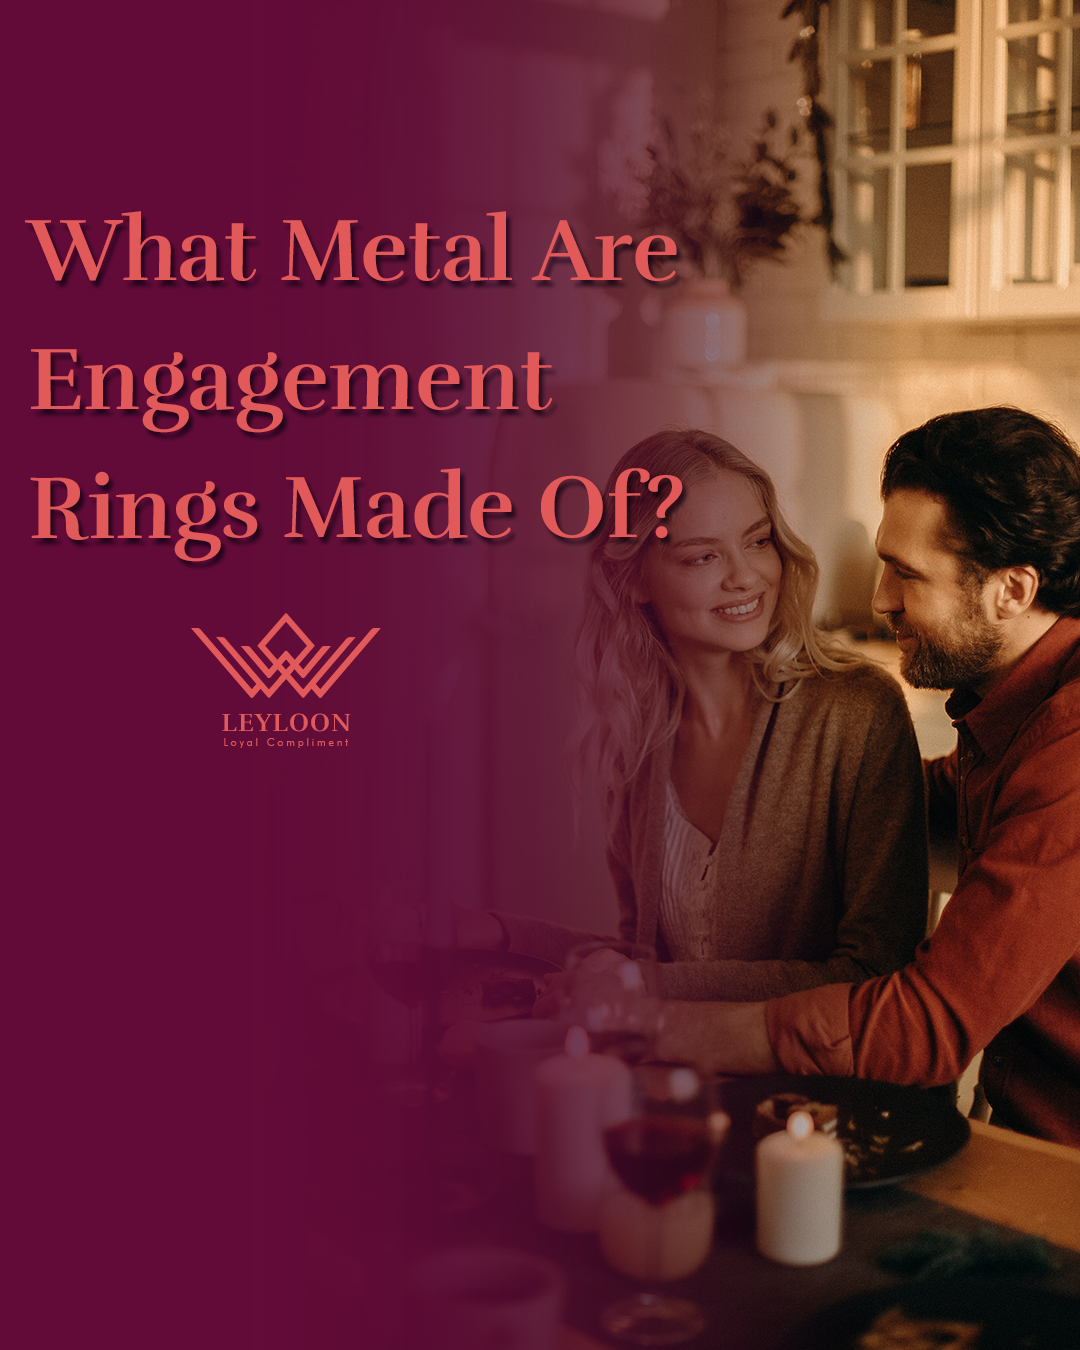 What Metal Are Engagement Rings Made Of?